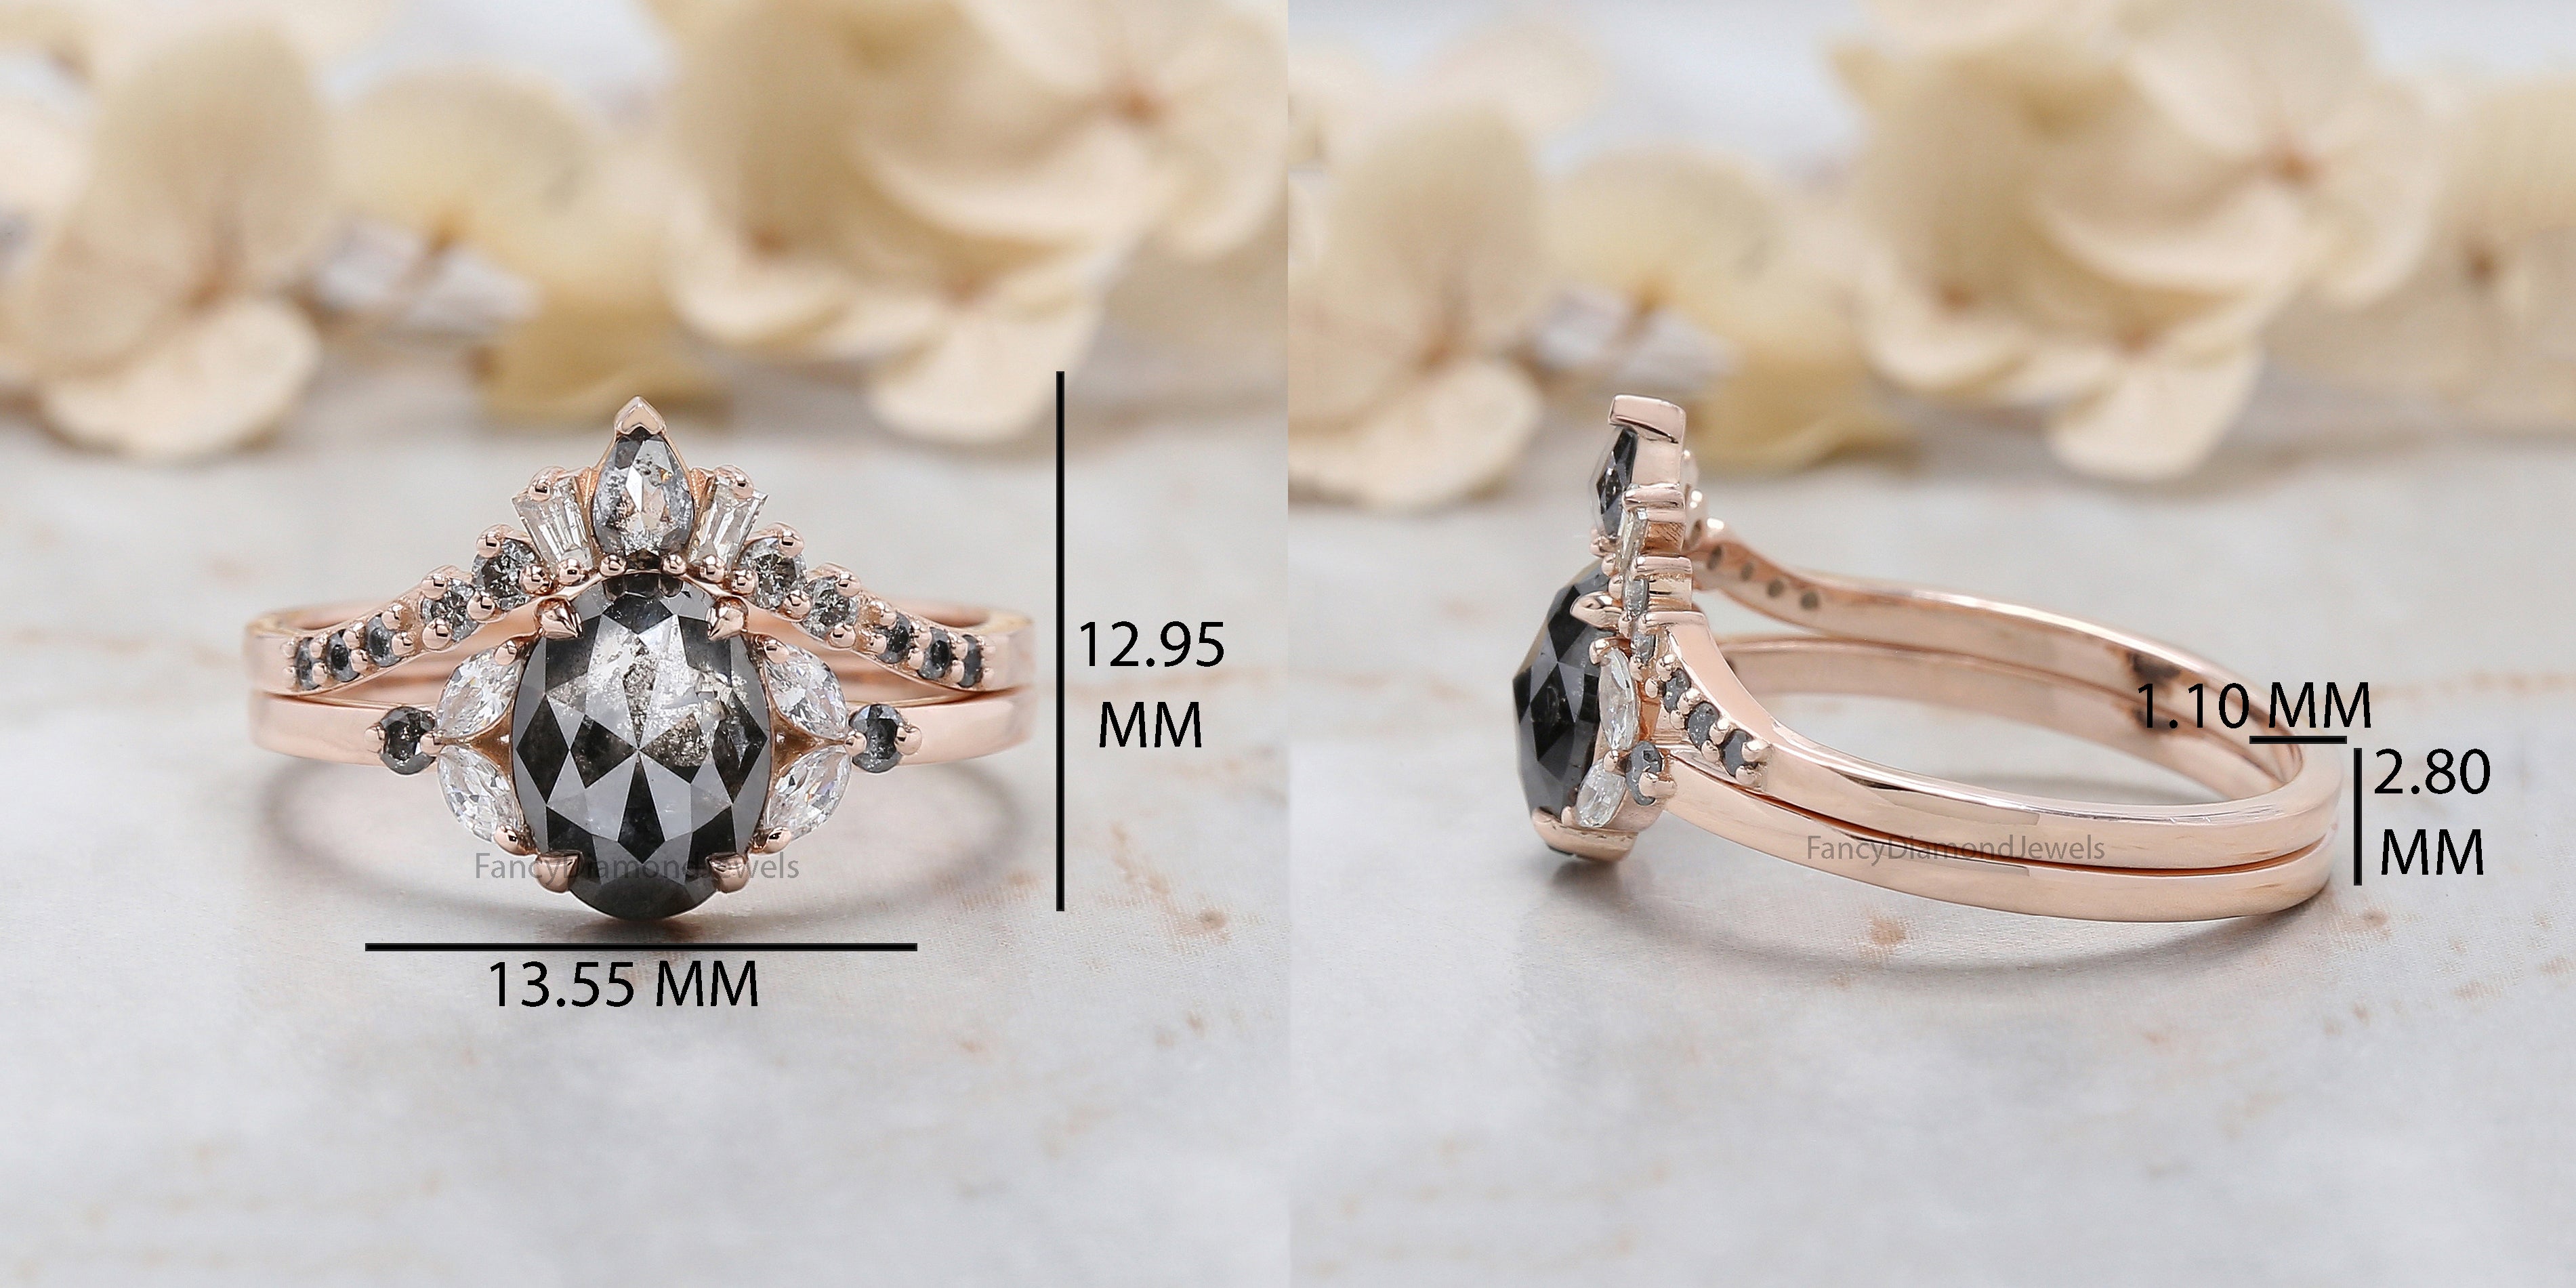 Oval Cut Salt And Pepper Diamond Ring 1.26 Ct 8.10 MM Oval Diamond Ring 14K Solid Rose Gold Silver Oval Engagement Ring Gift For Her QN2416